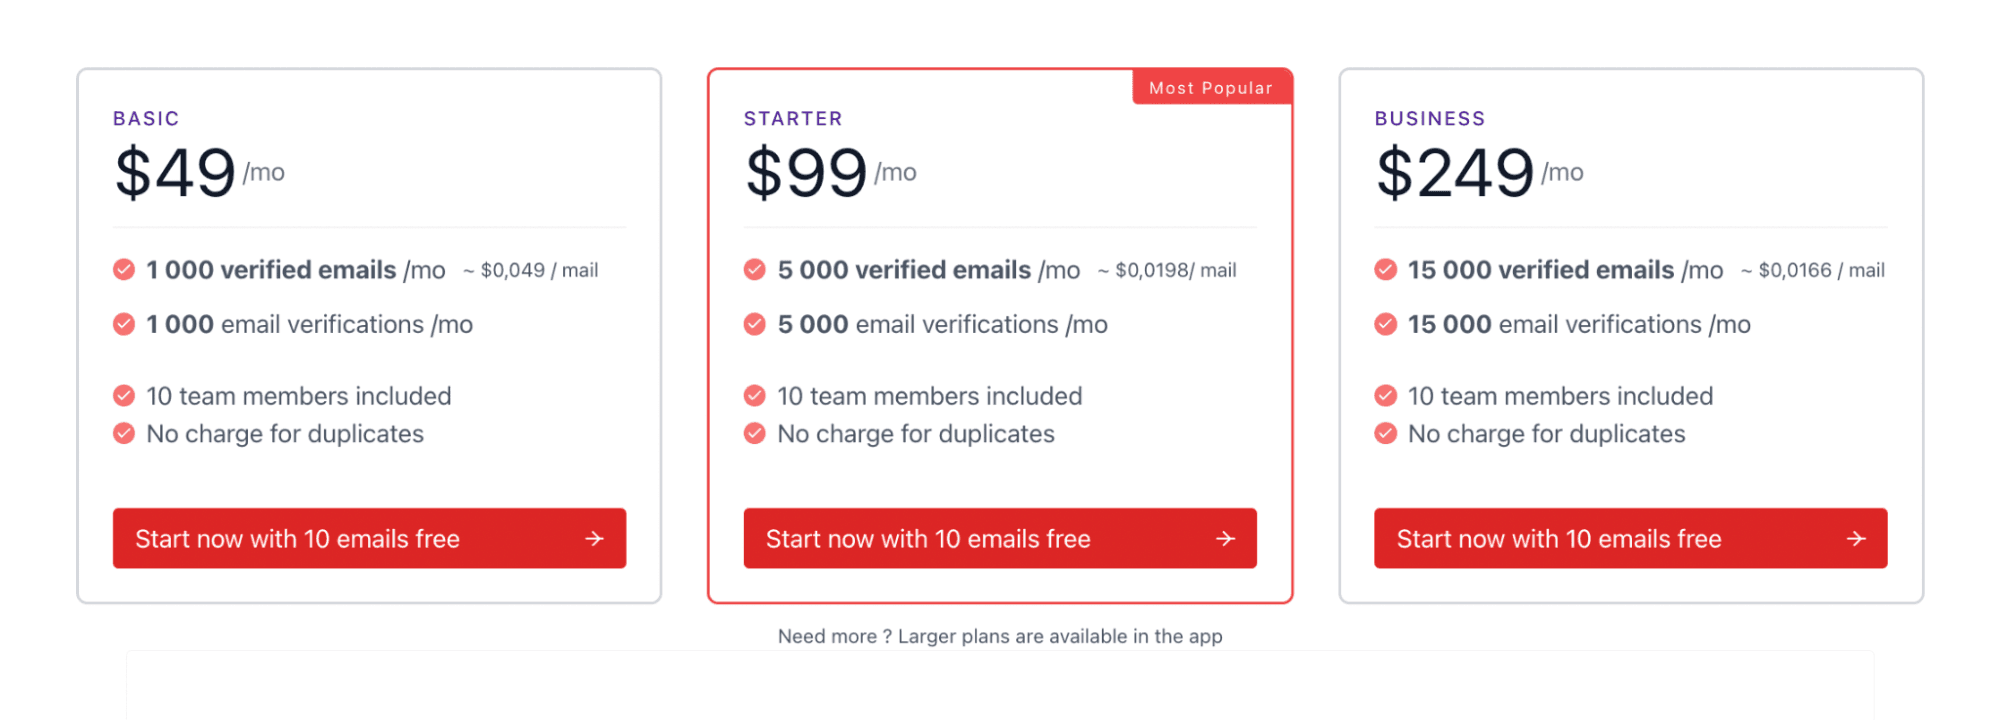 findymail pricing page - image60.png